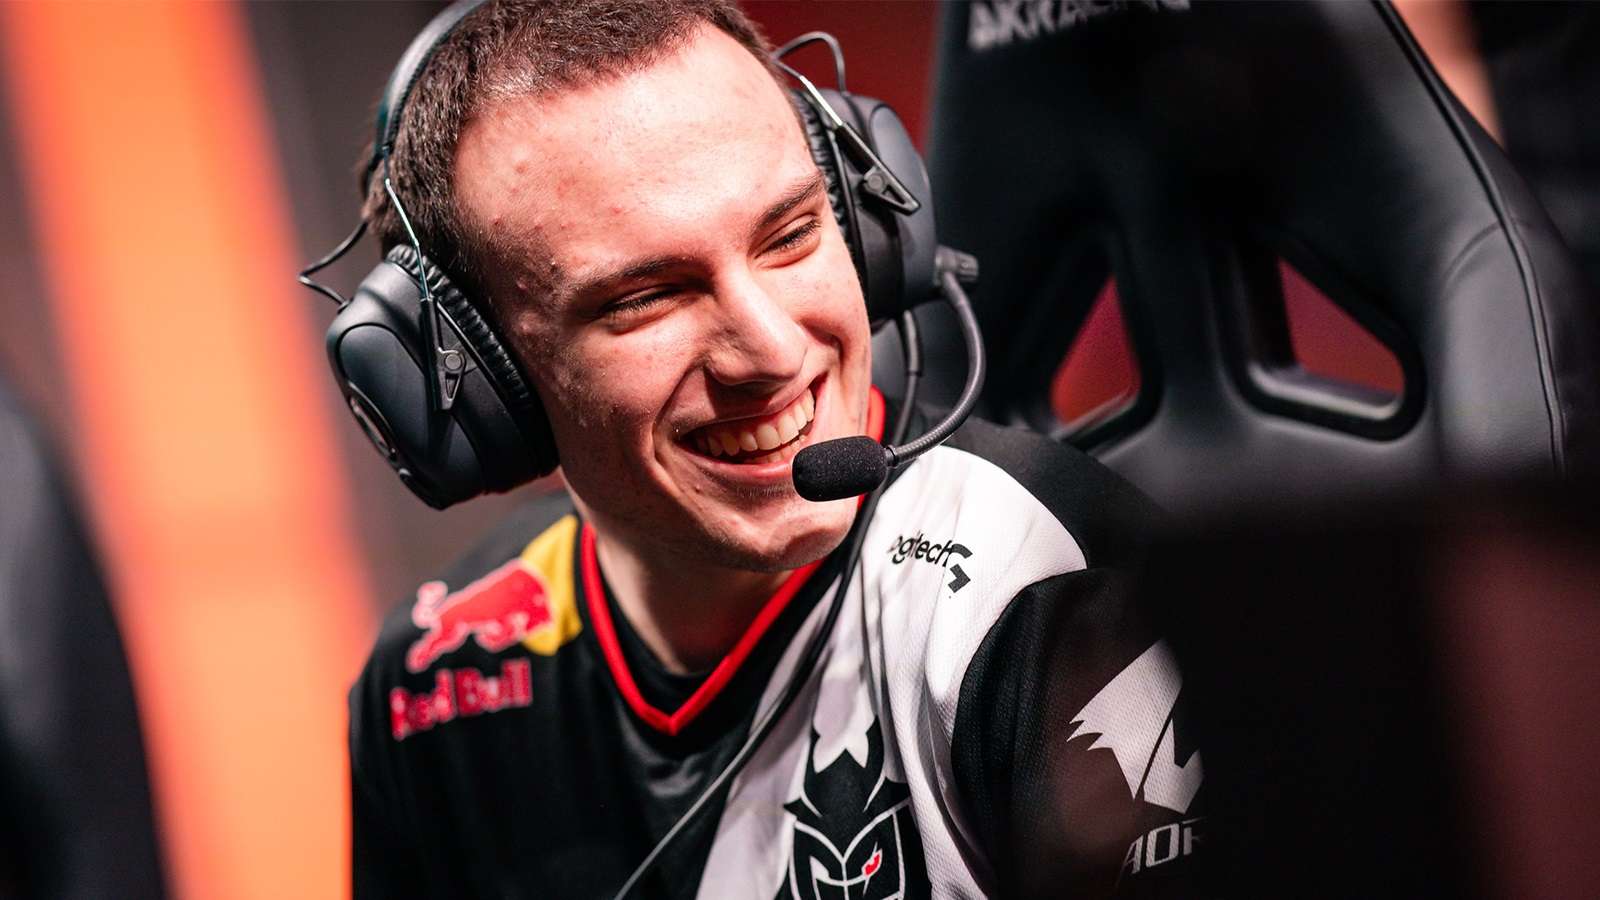 Perkz smiling on G2 Esports Cloud9 playing in the LCS.